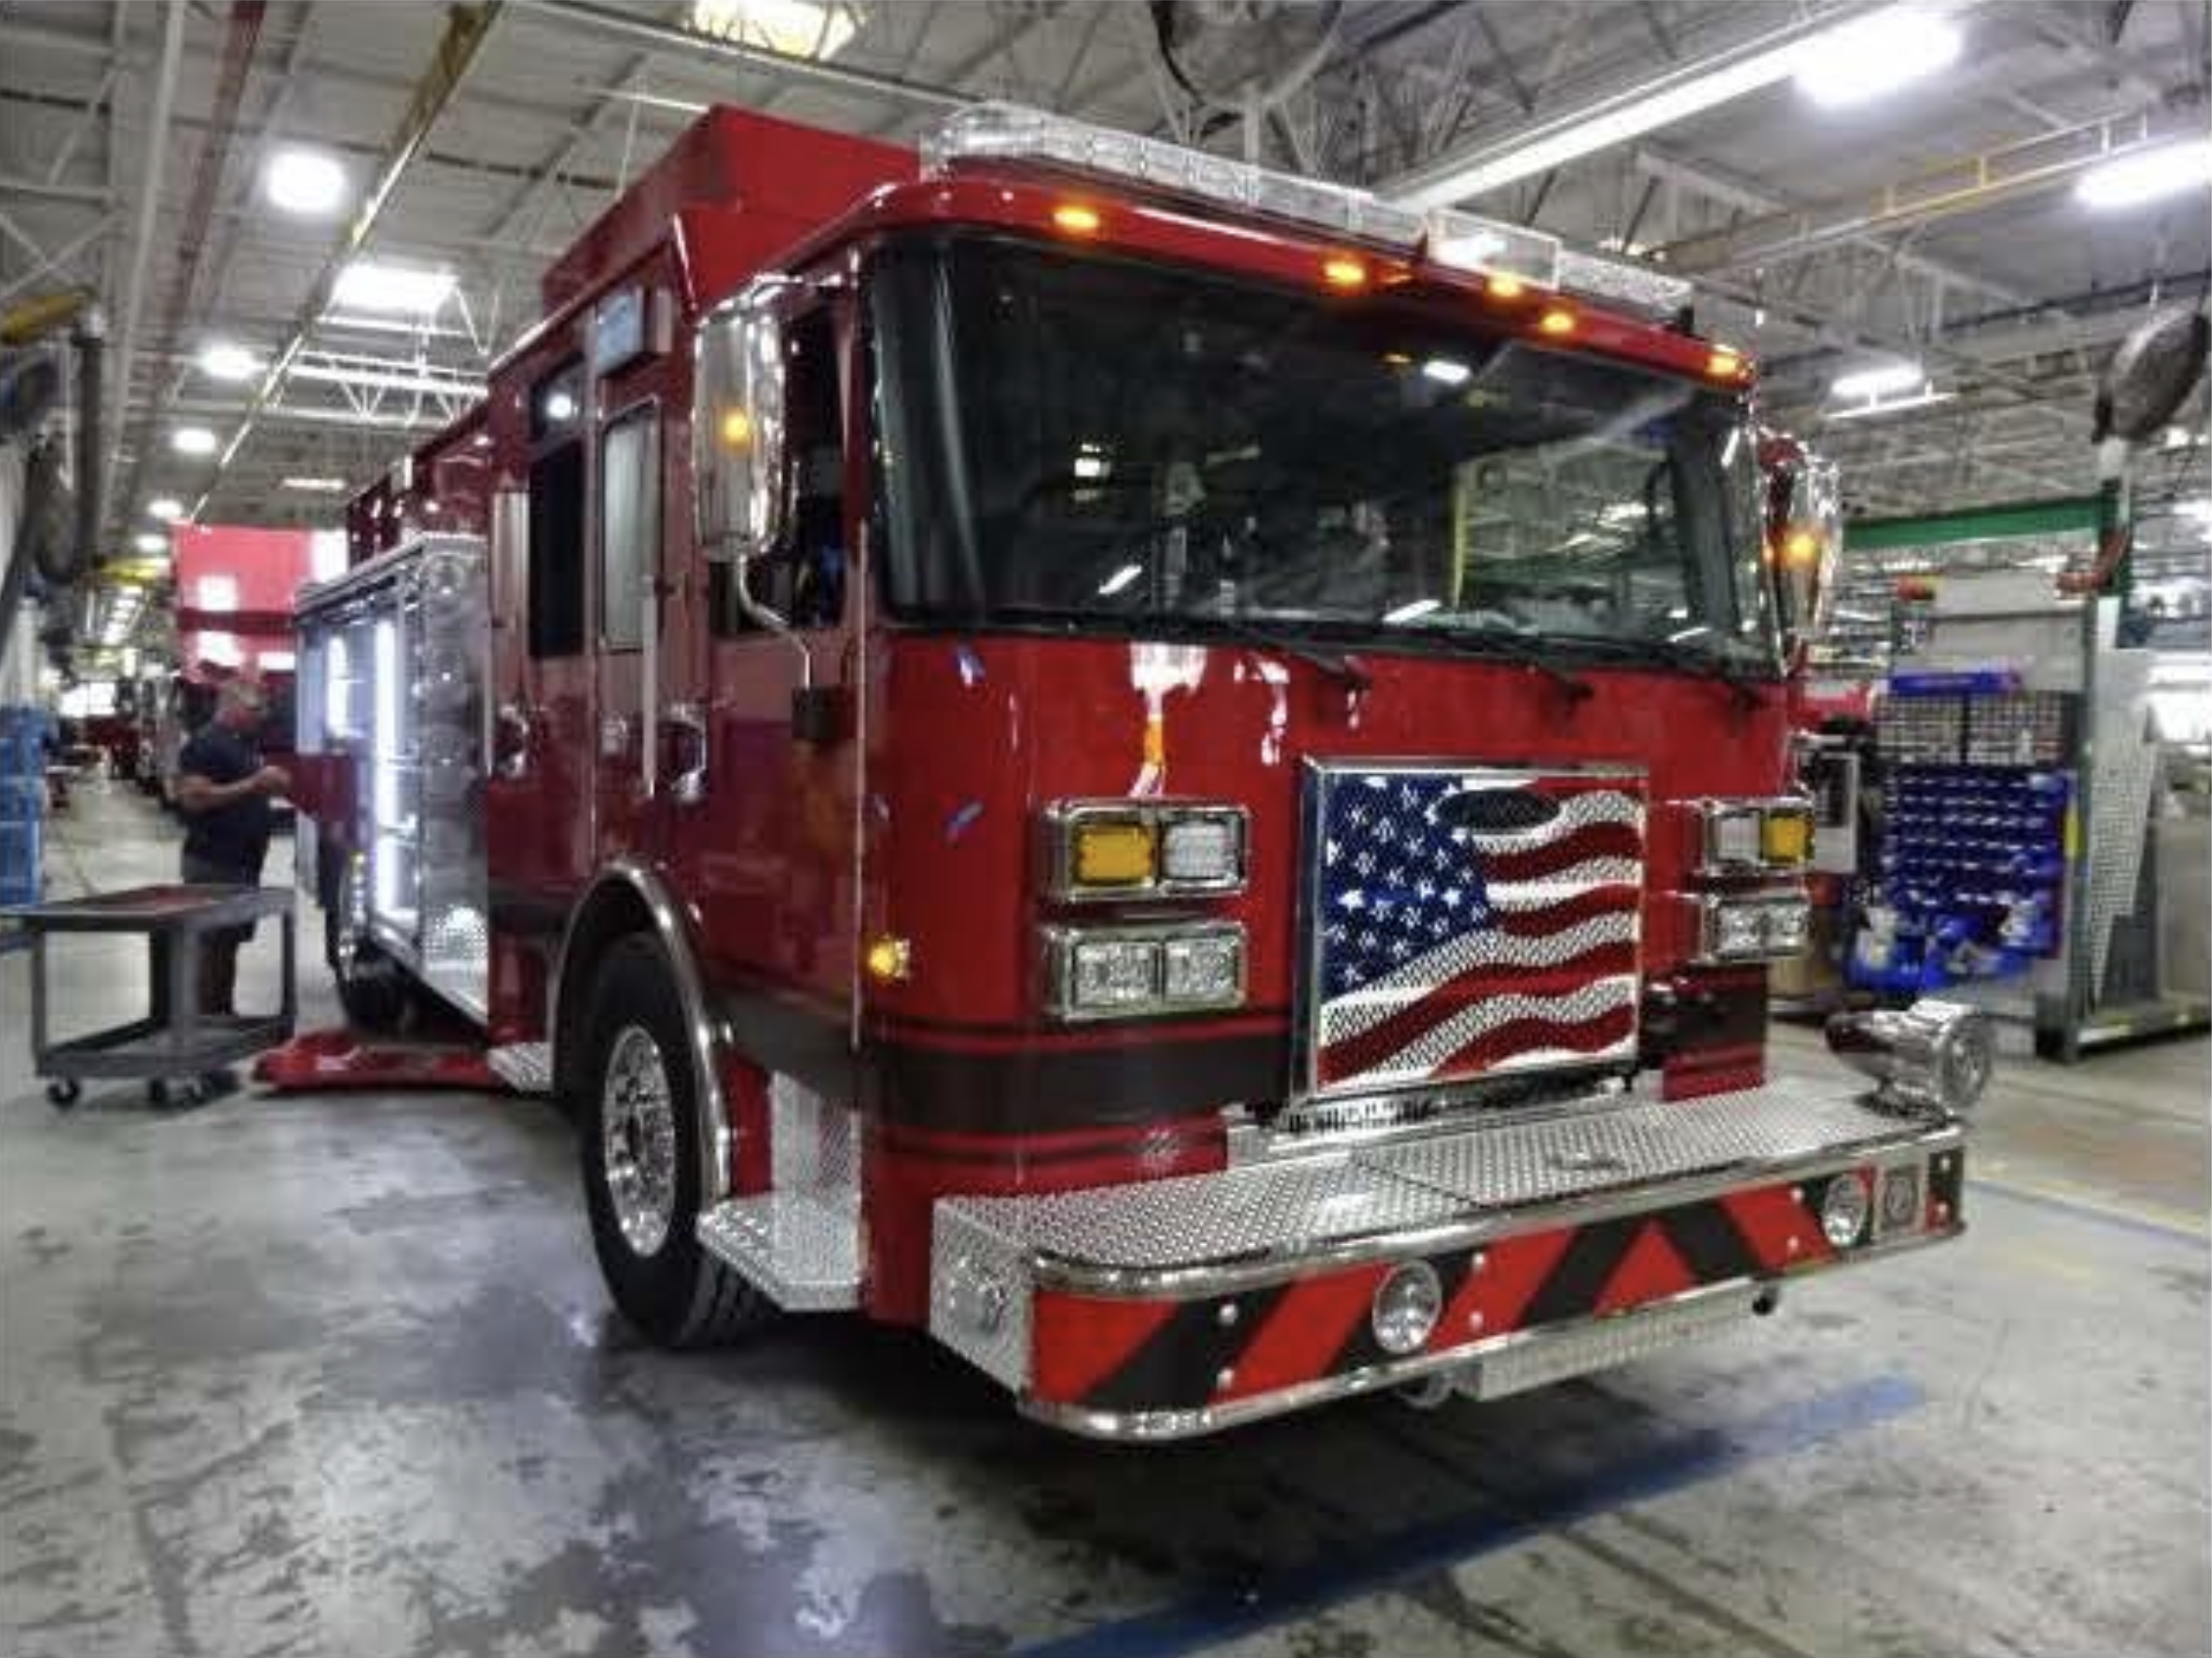 Hollowell Red Fire truck with American flag on front grill